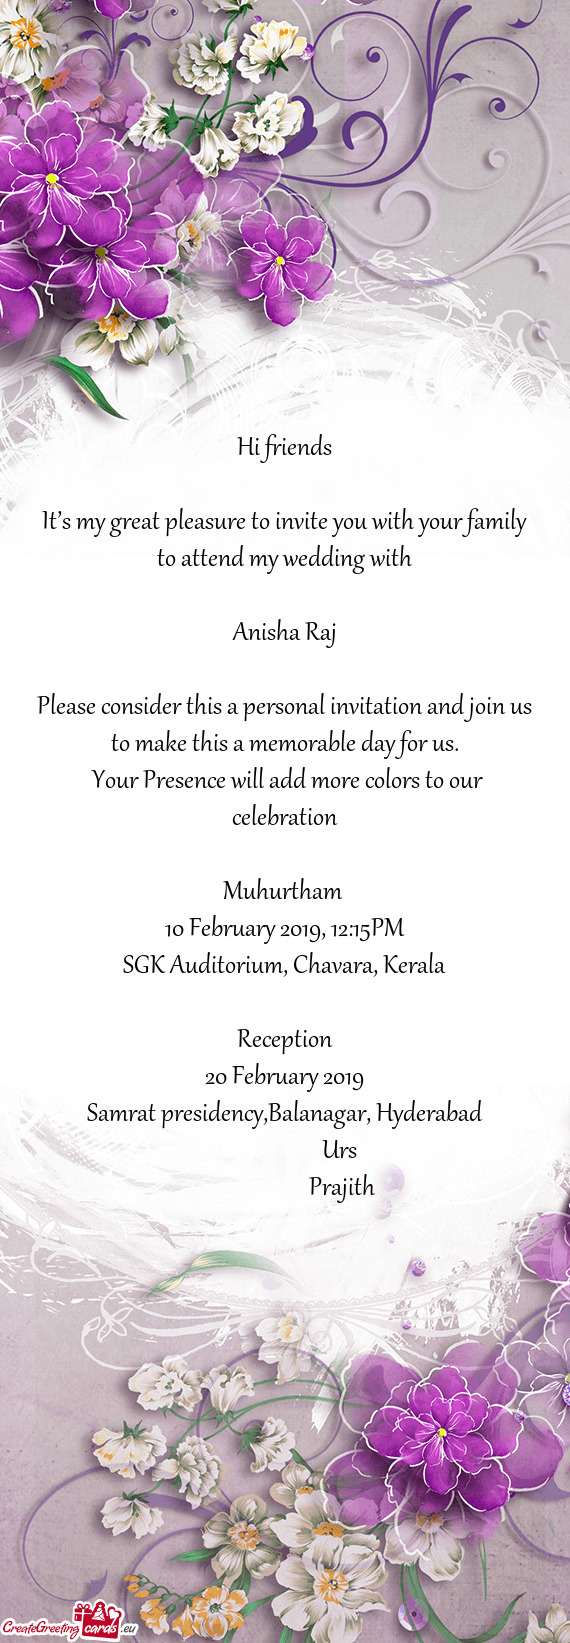 Hi friends
 
 It’s my great pleasure to invite you with your family to attend my wedding with
 
 A